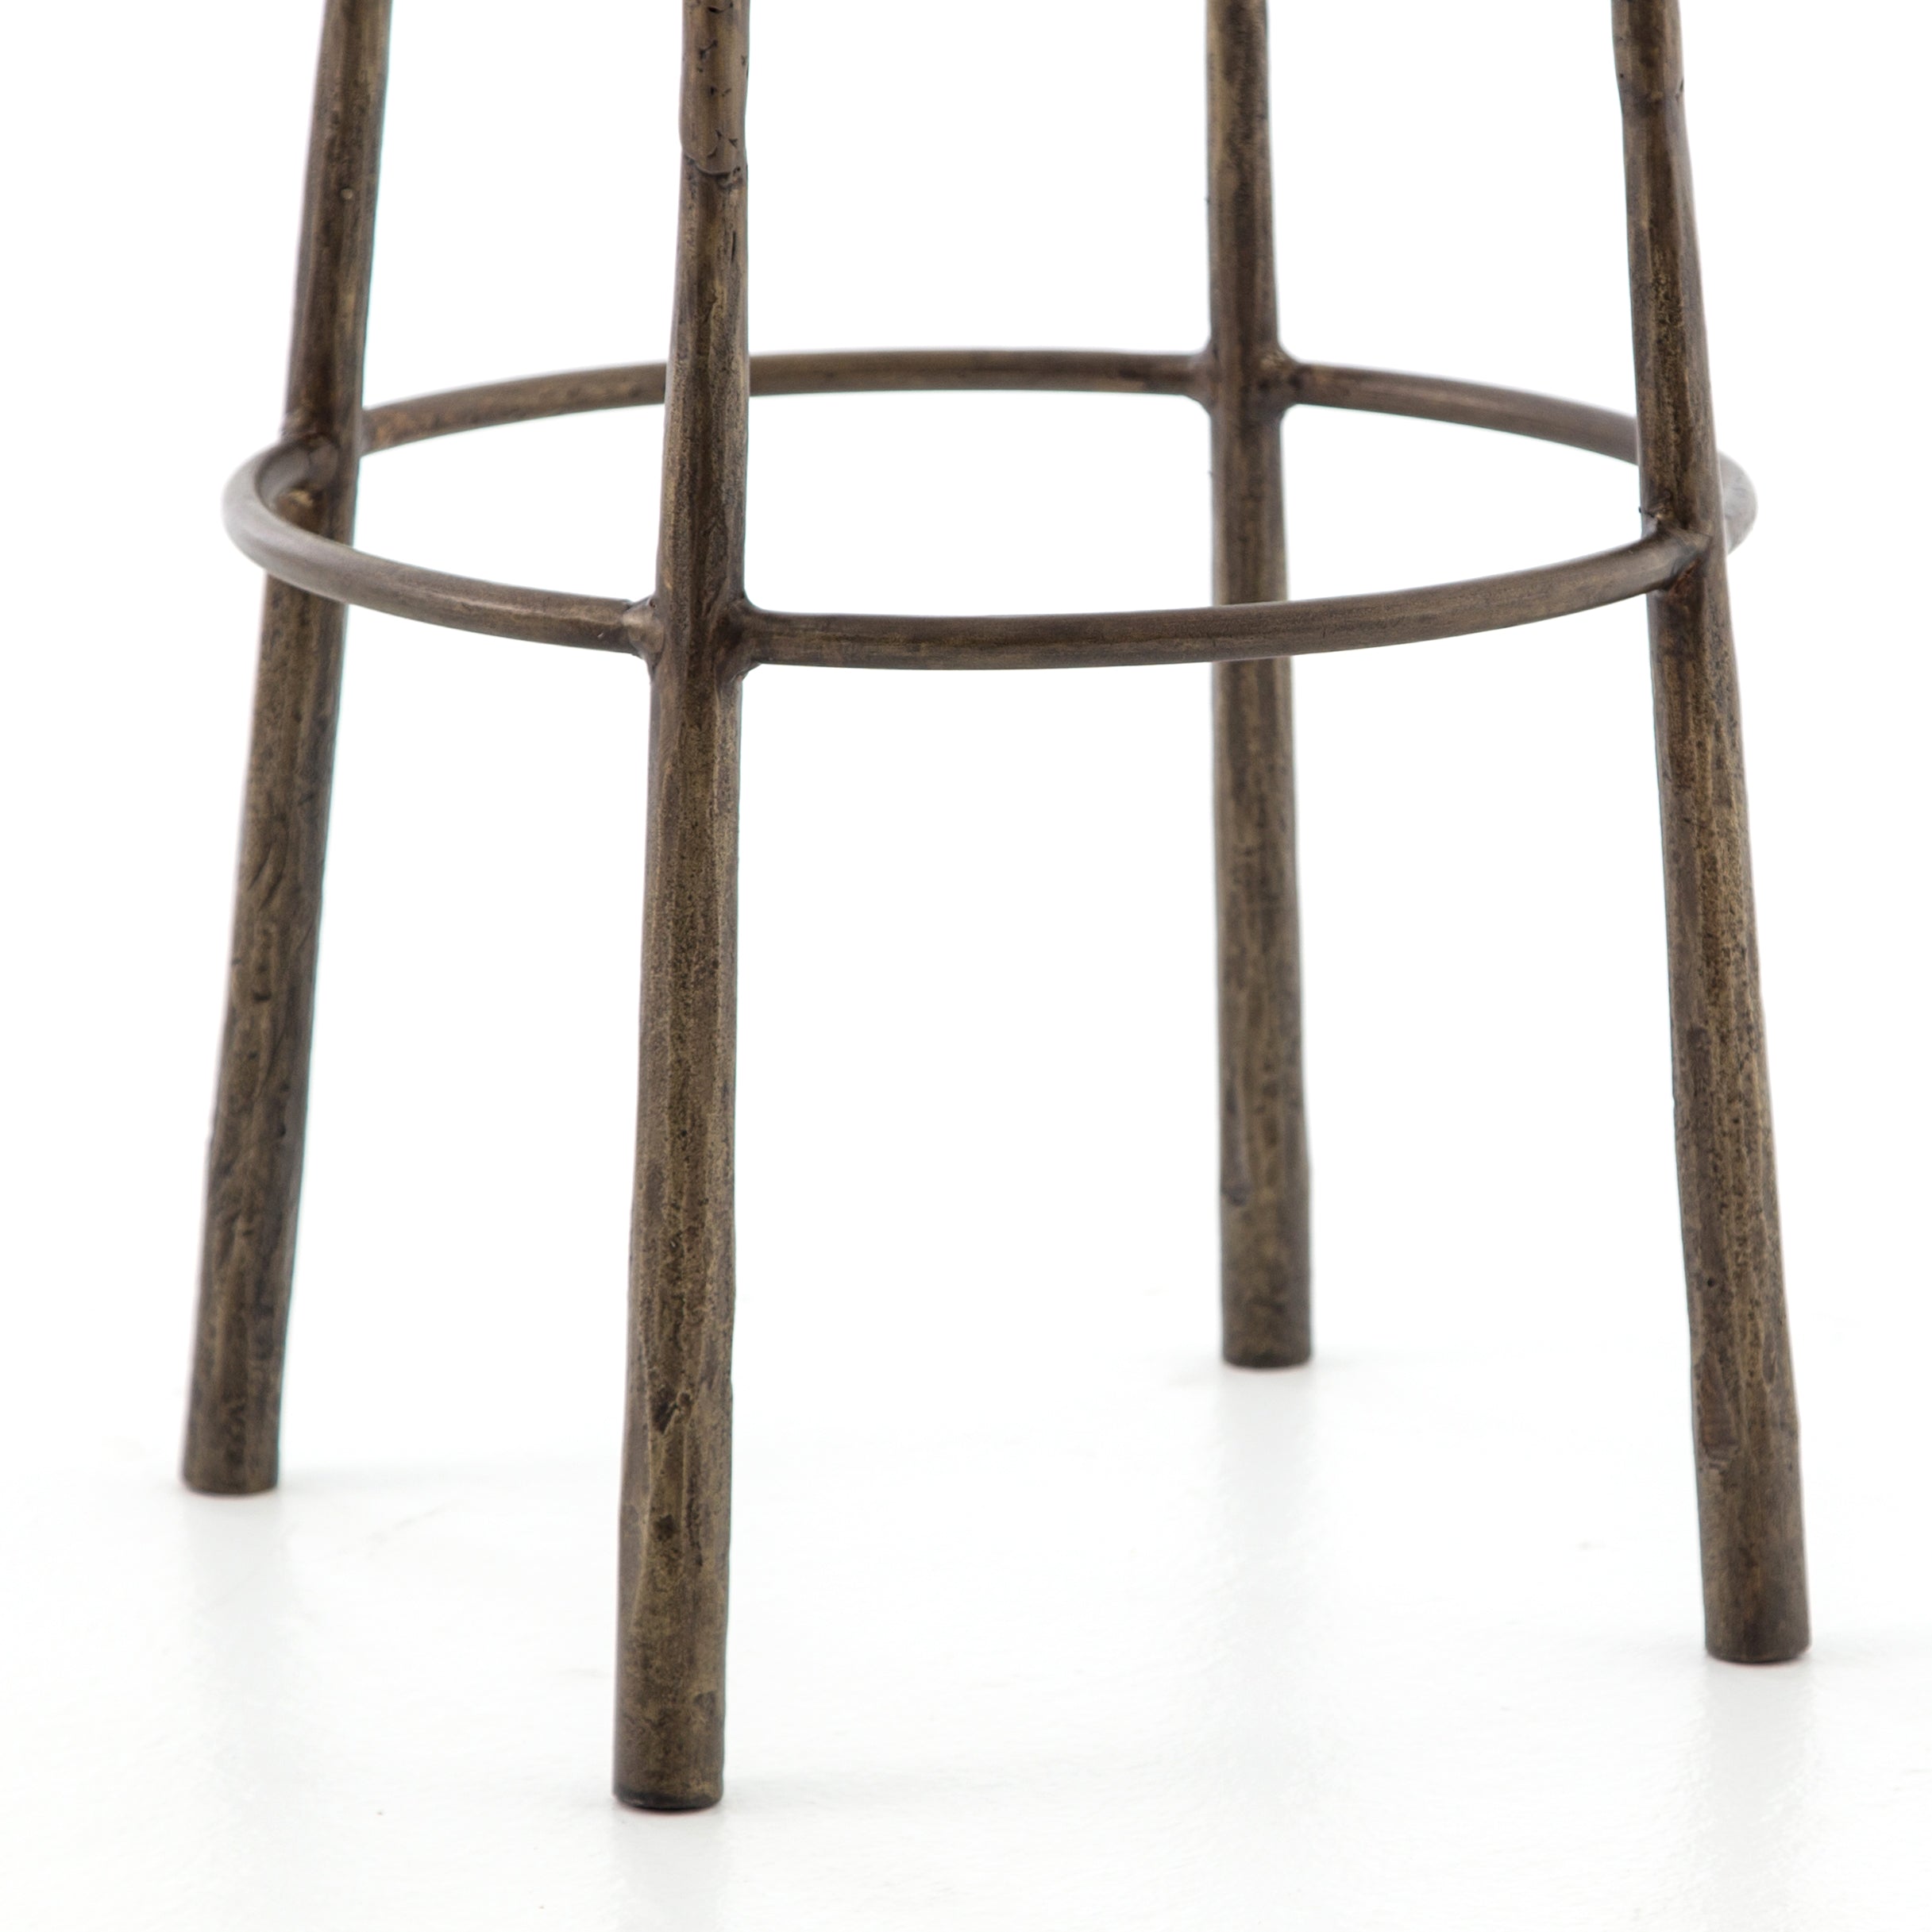 The Westwood Antique Brass Bar + Counter Stool have stunning hammered iron legs for a rich, rough look.   Counter Stool: 16"w x 16"d x 26.25"h Bar Stool: 16"w x 16"d x 30"h  Materials: Iron